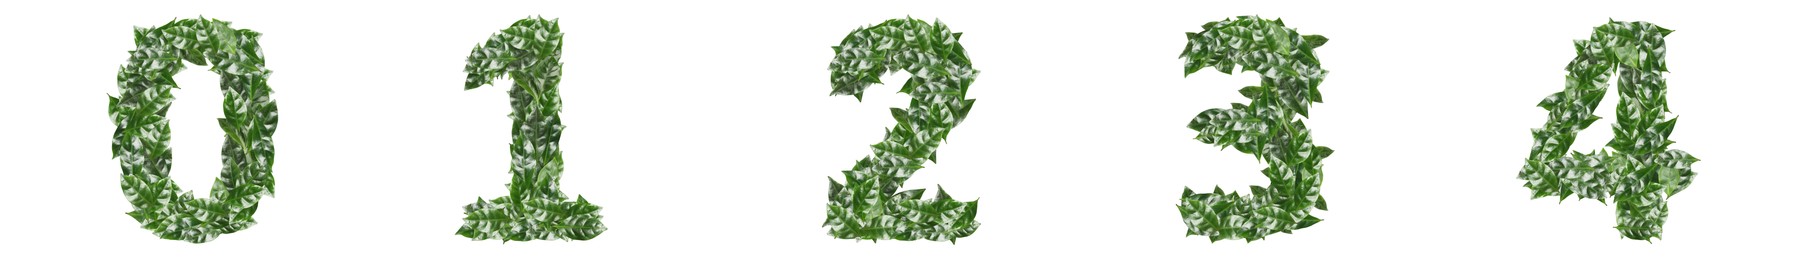 Numbers made of fresh green leaves on white background. Banner design